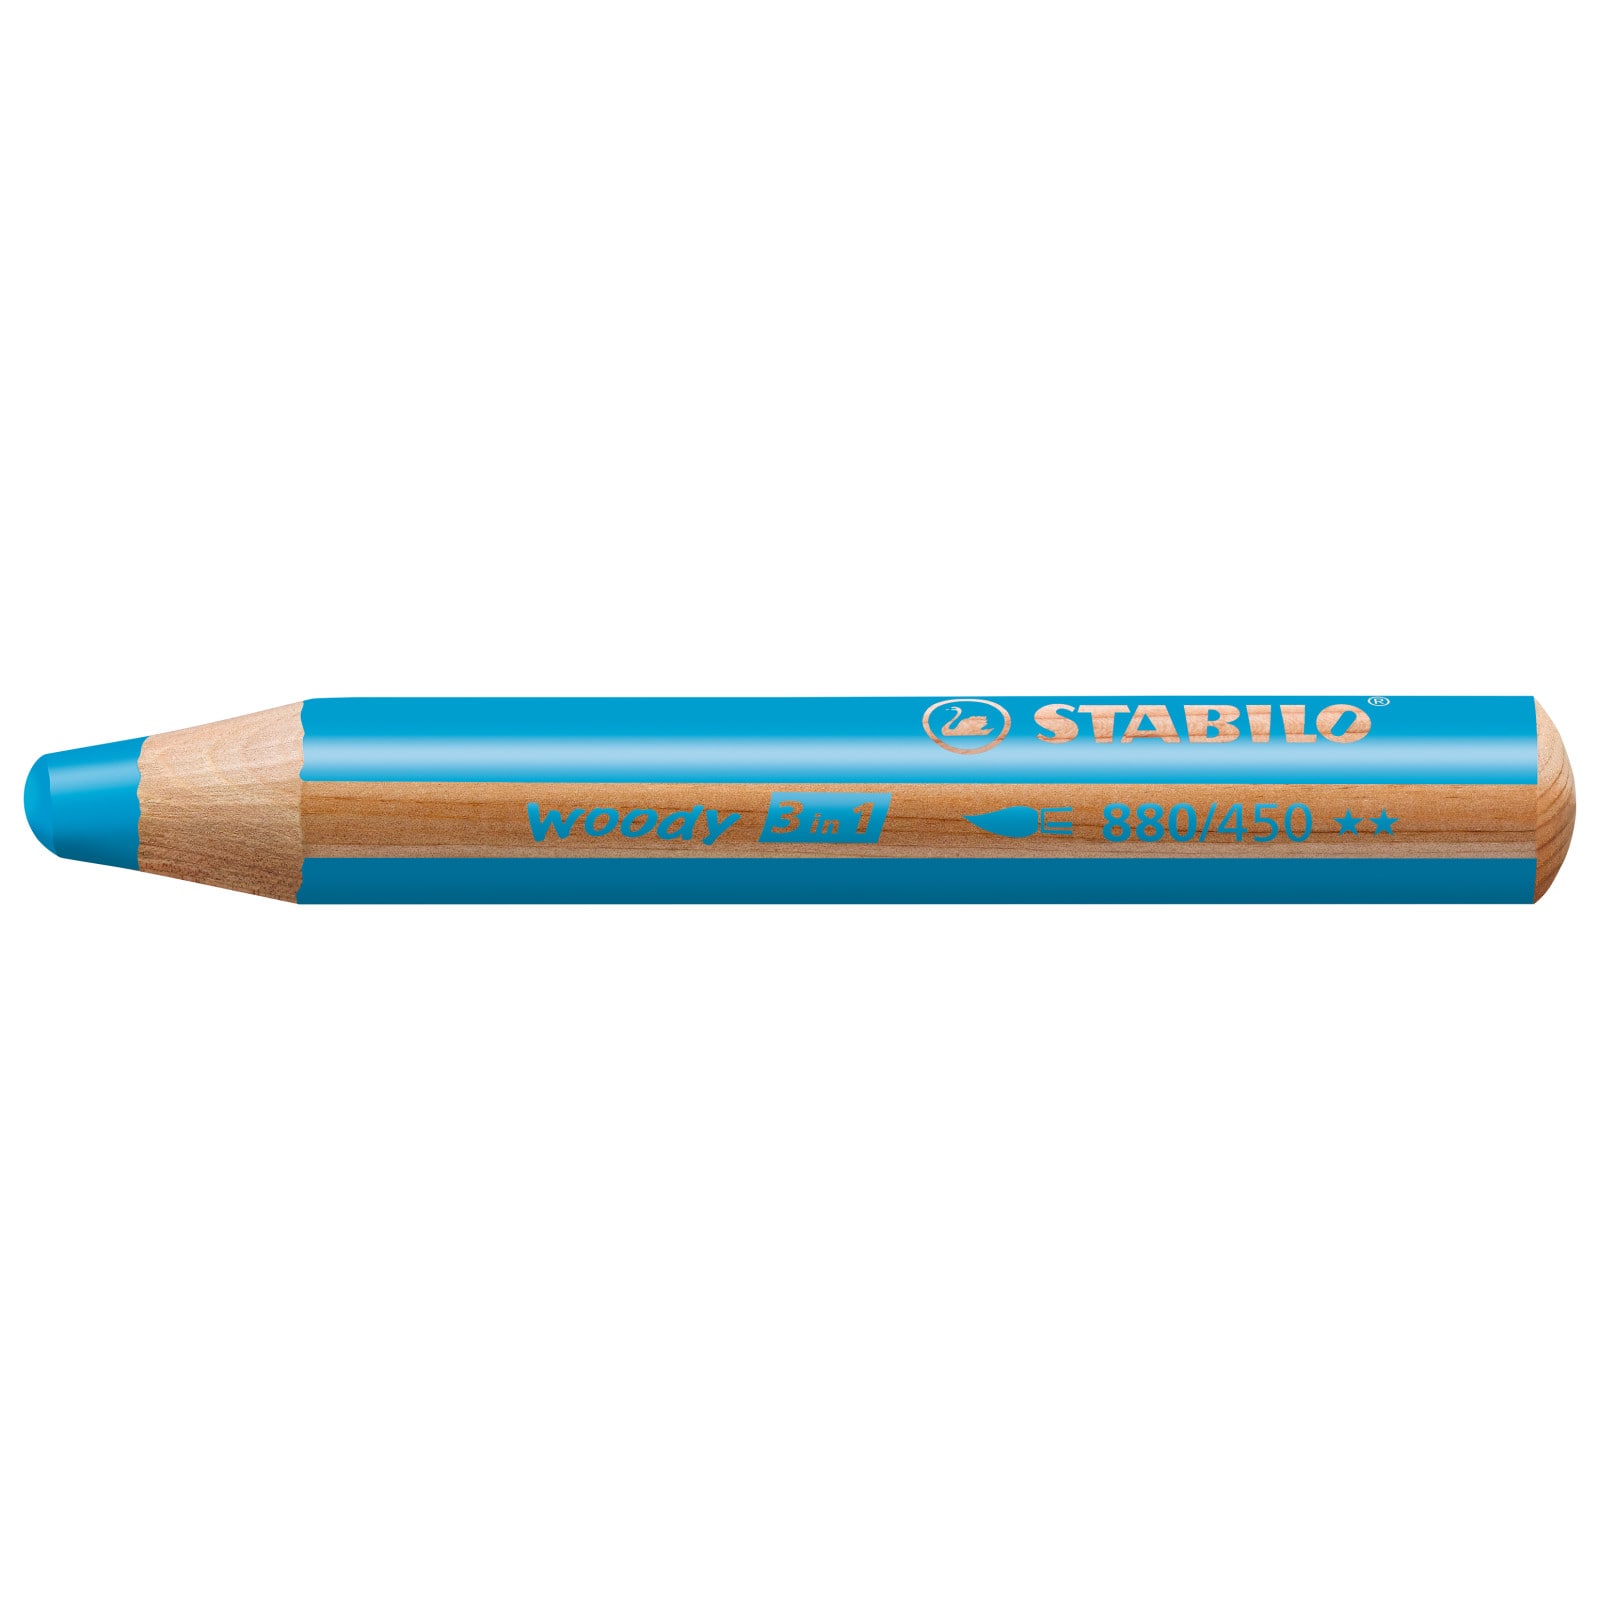 STABILO&#xAE; Woody 3 in 1 Colored Pencil